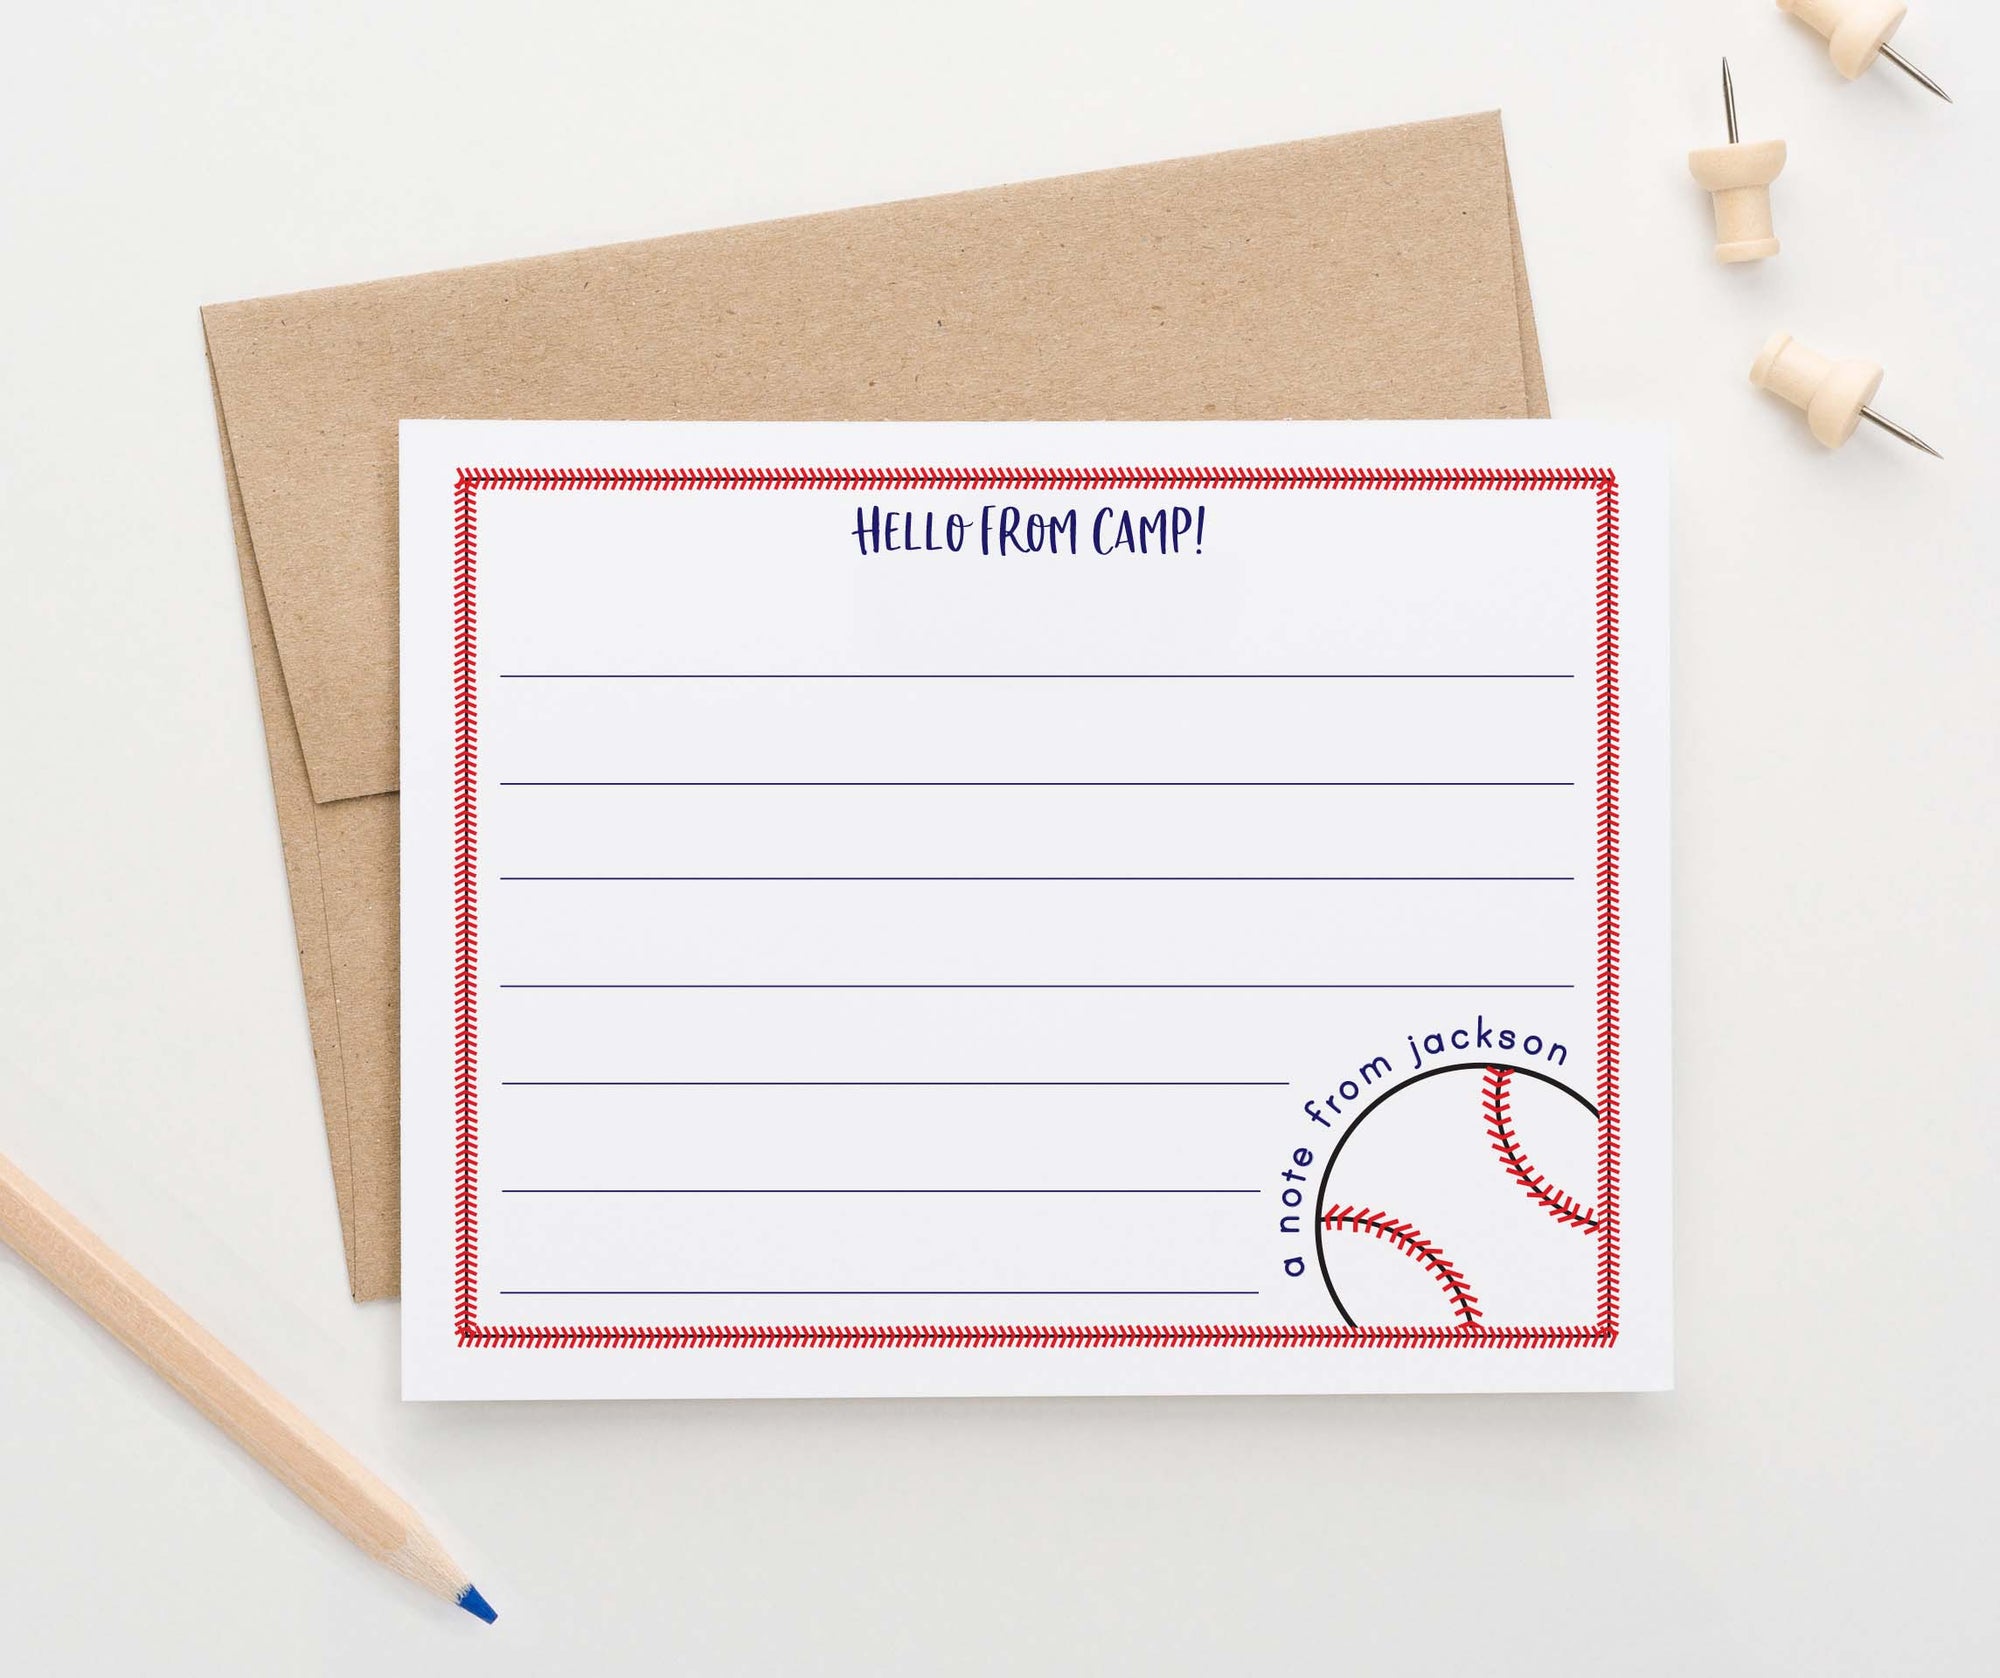 KS206 Personalized Baseball Camp Stationary for Boys a note from sport kids